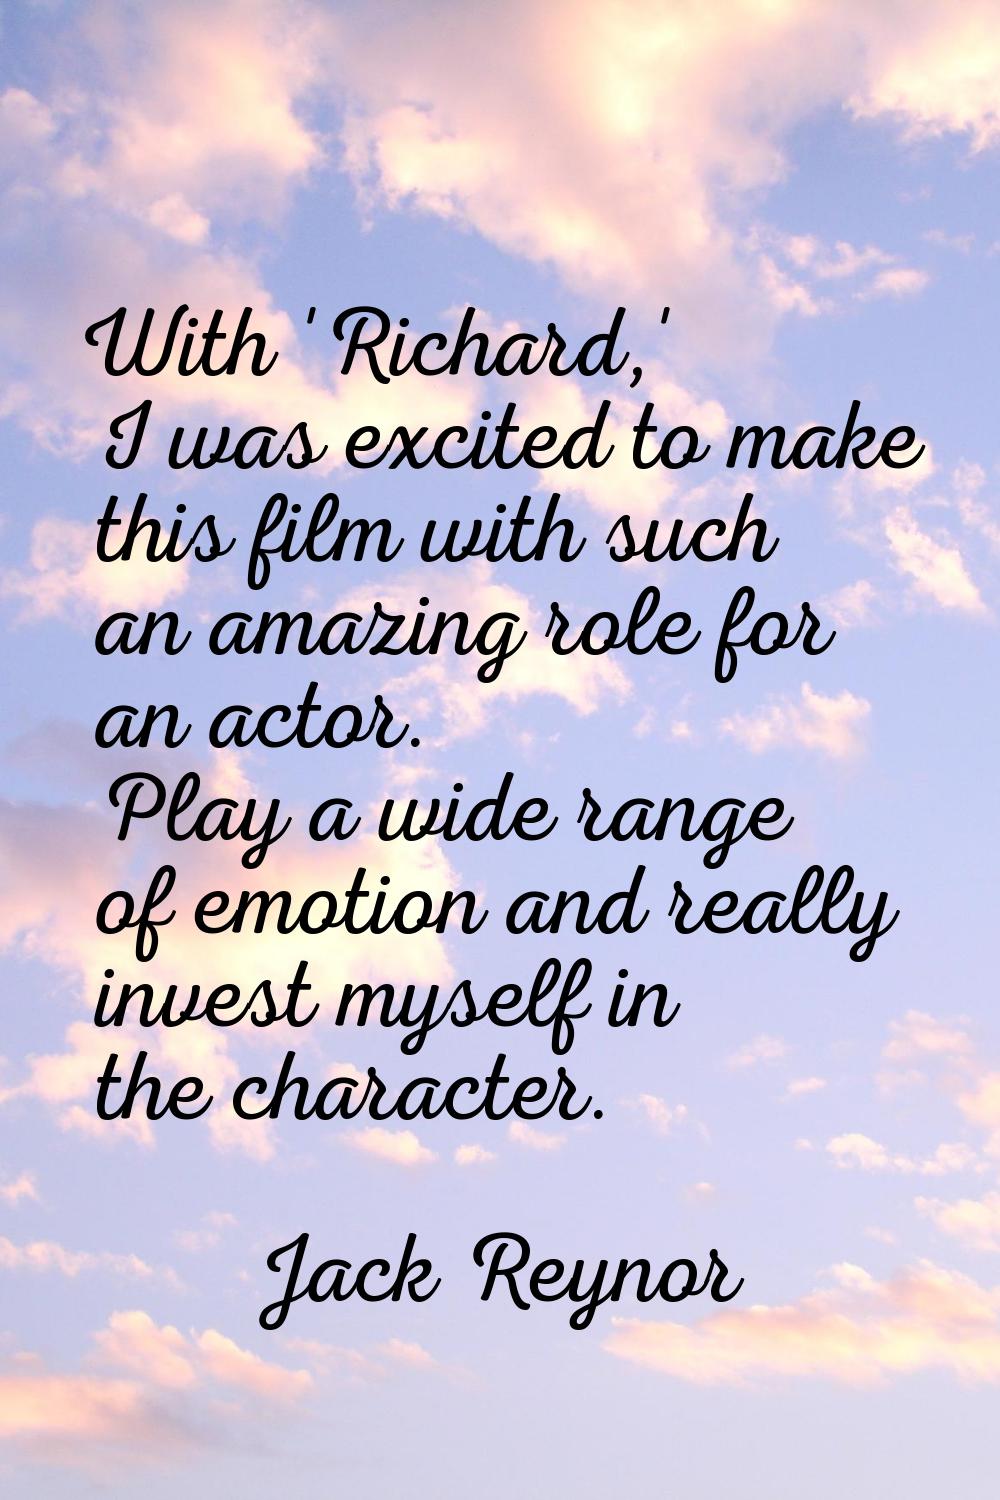 With 'Richard,' I was excited to make this film with such an amazing role for an actor. Play a wide